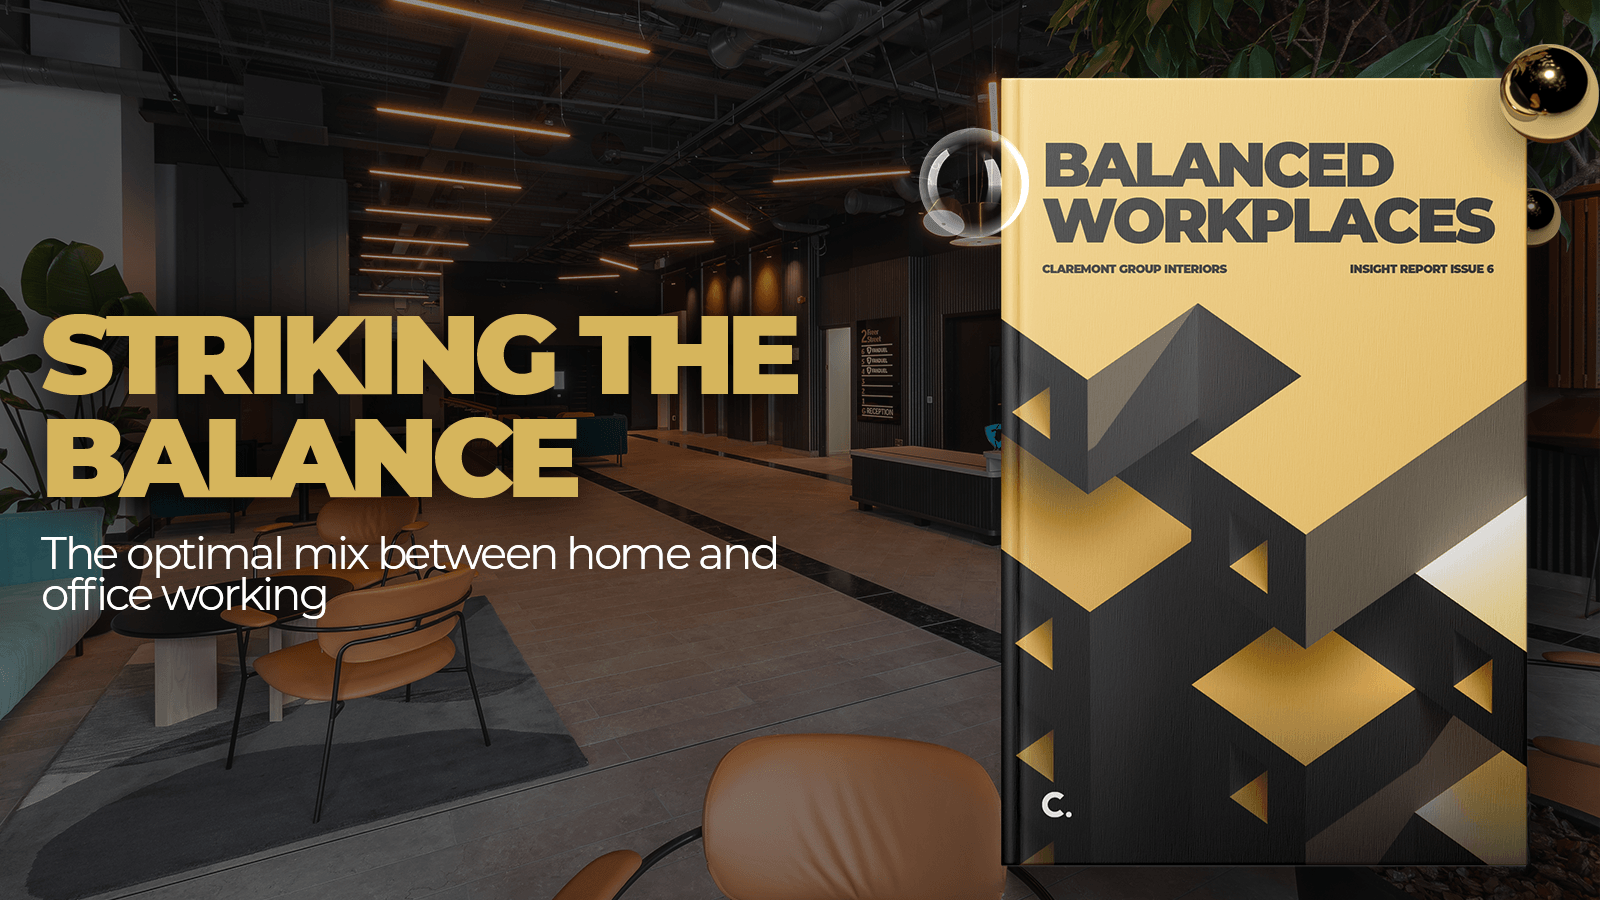 Issue 6 – Annual Insight Report ‘Balanced Workplaces’